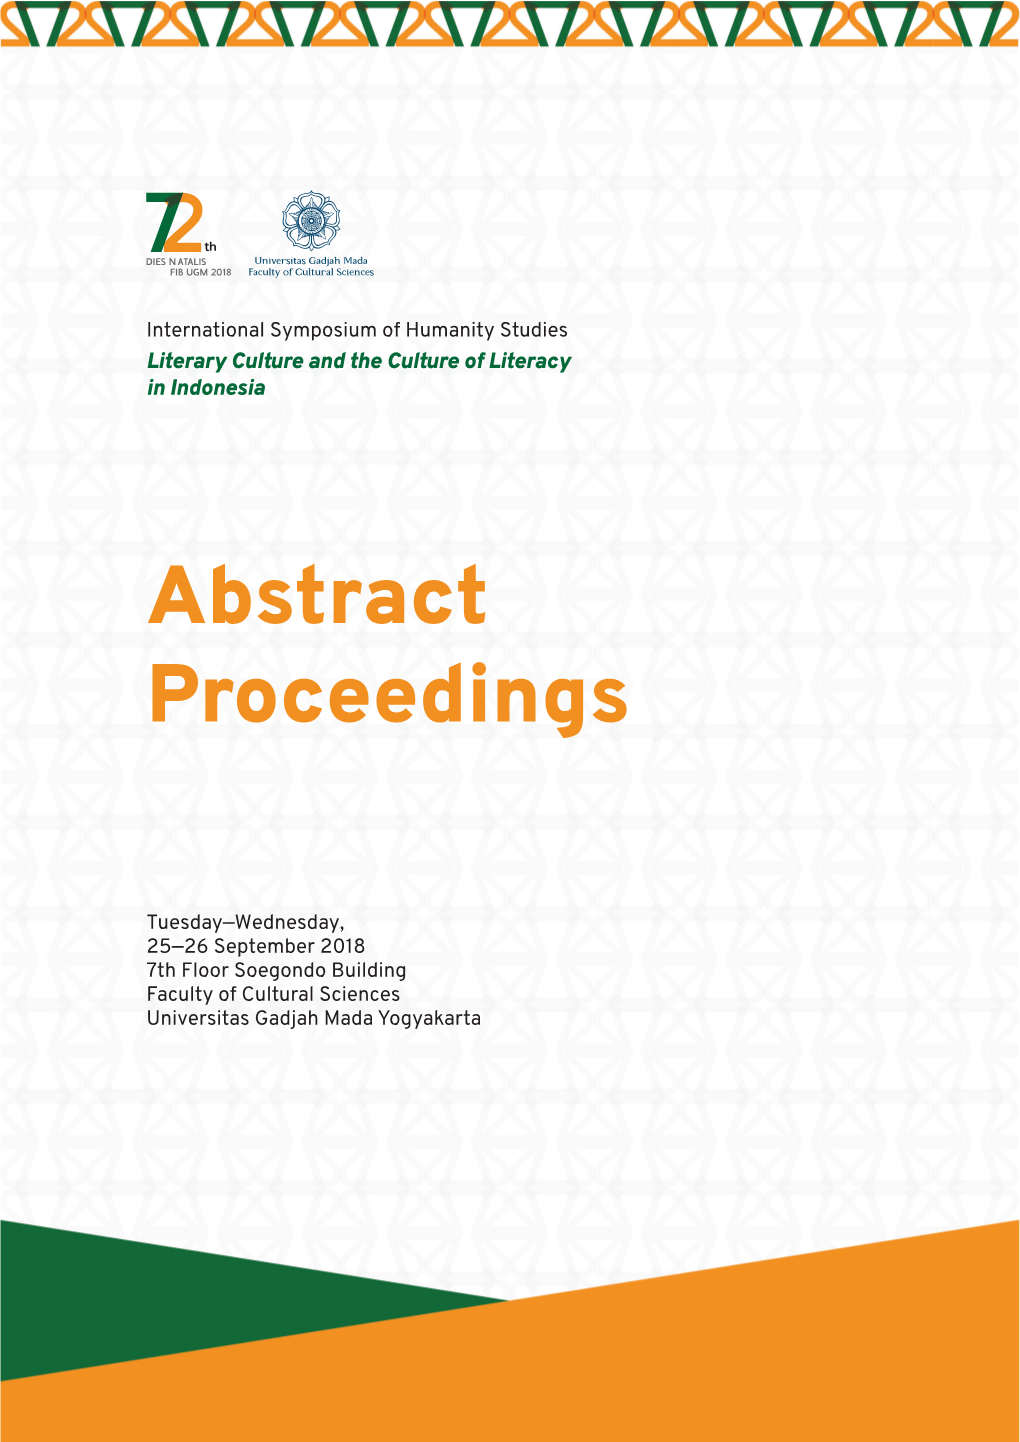 Abstract Proceedings